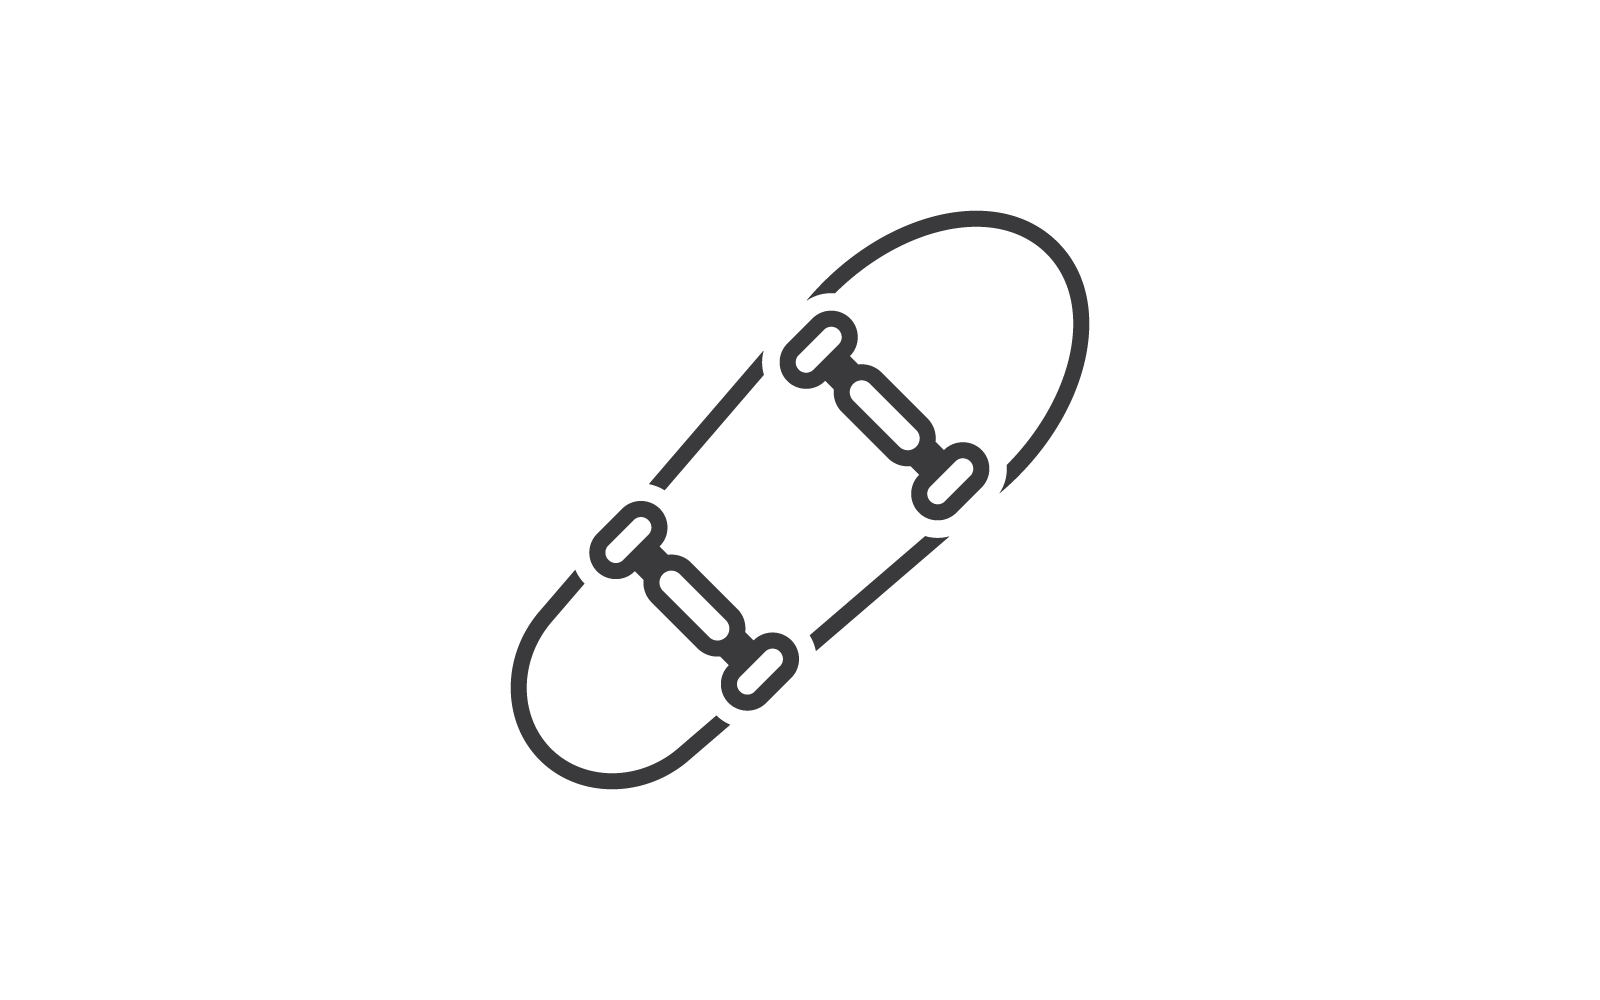 Skateboard icon illustration vector flat design is the logo and icon for sports skater entertainment